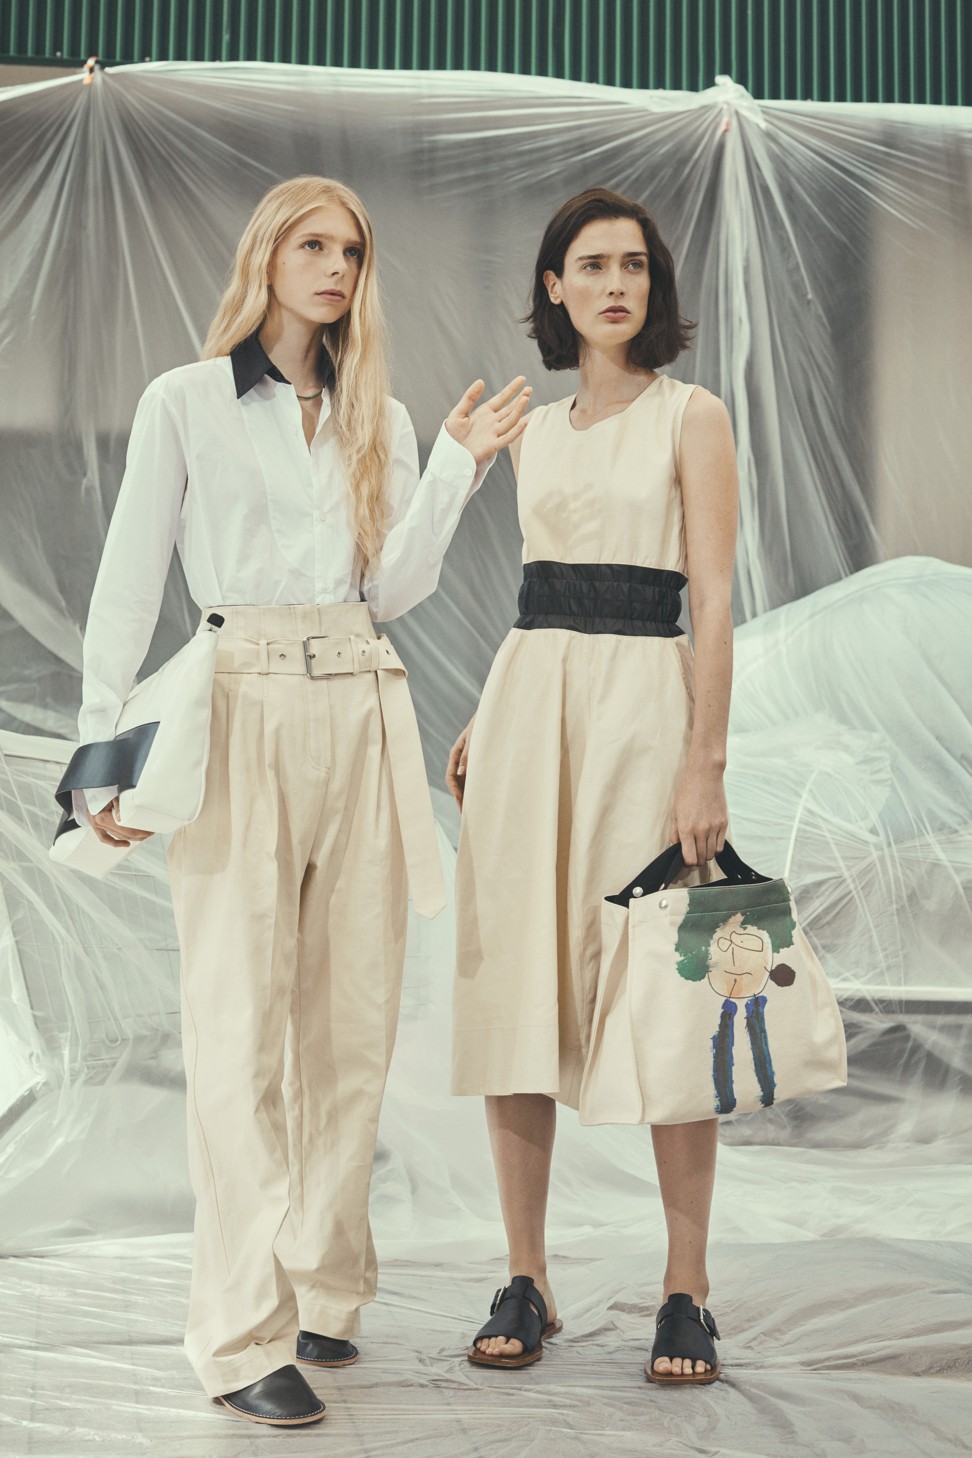 Looks from Plan C’s spring/summer 2020 collection. Carolina Castiglioni says the silhouette of her designs is usually oversized, and the quality of fabrics “very important”.